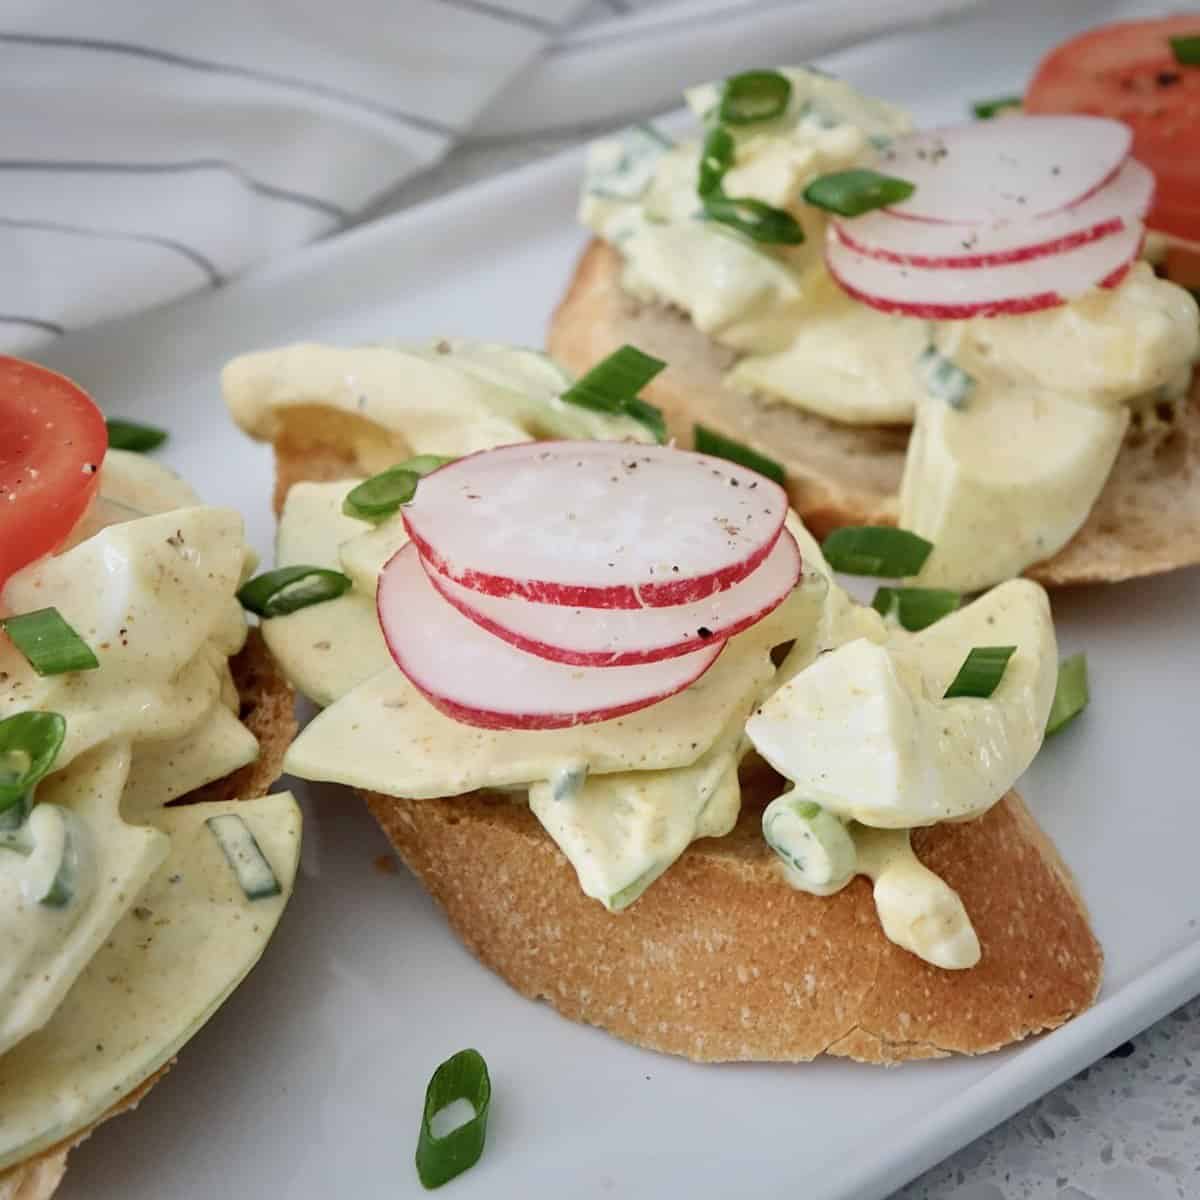 German curry egg salad served on baguette rounds with sliced radishes and sliced tomatoes